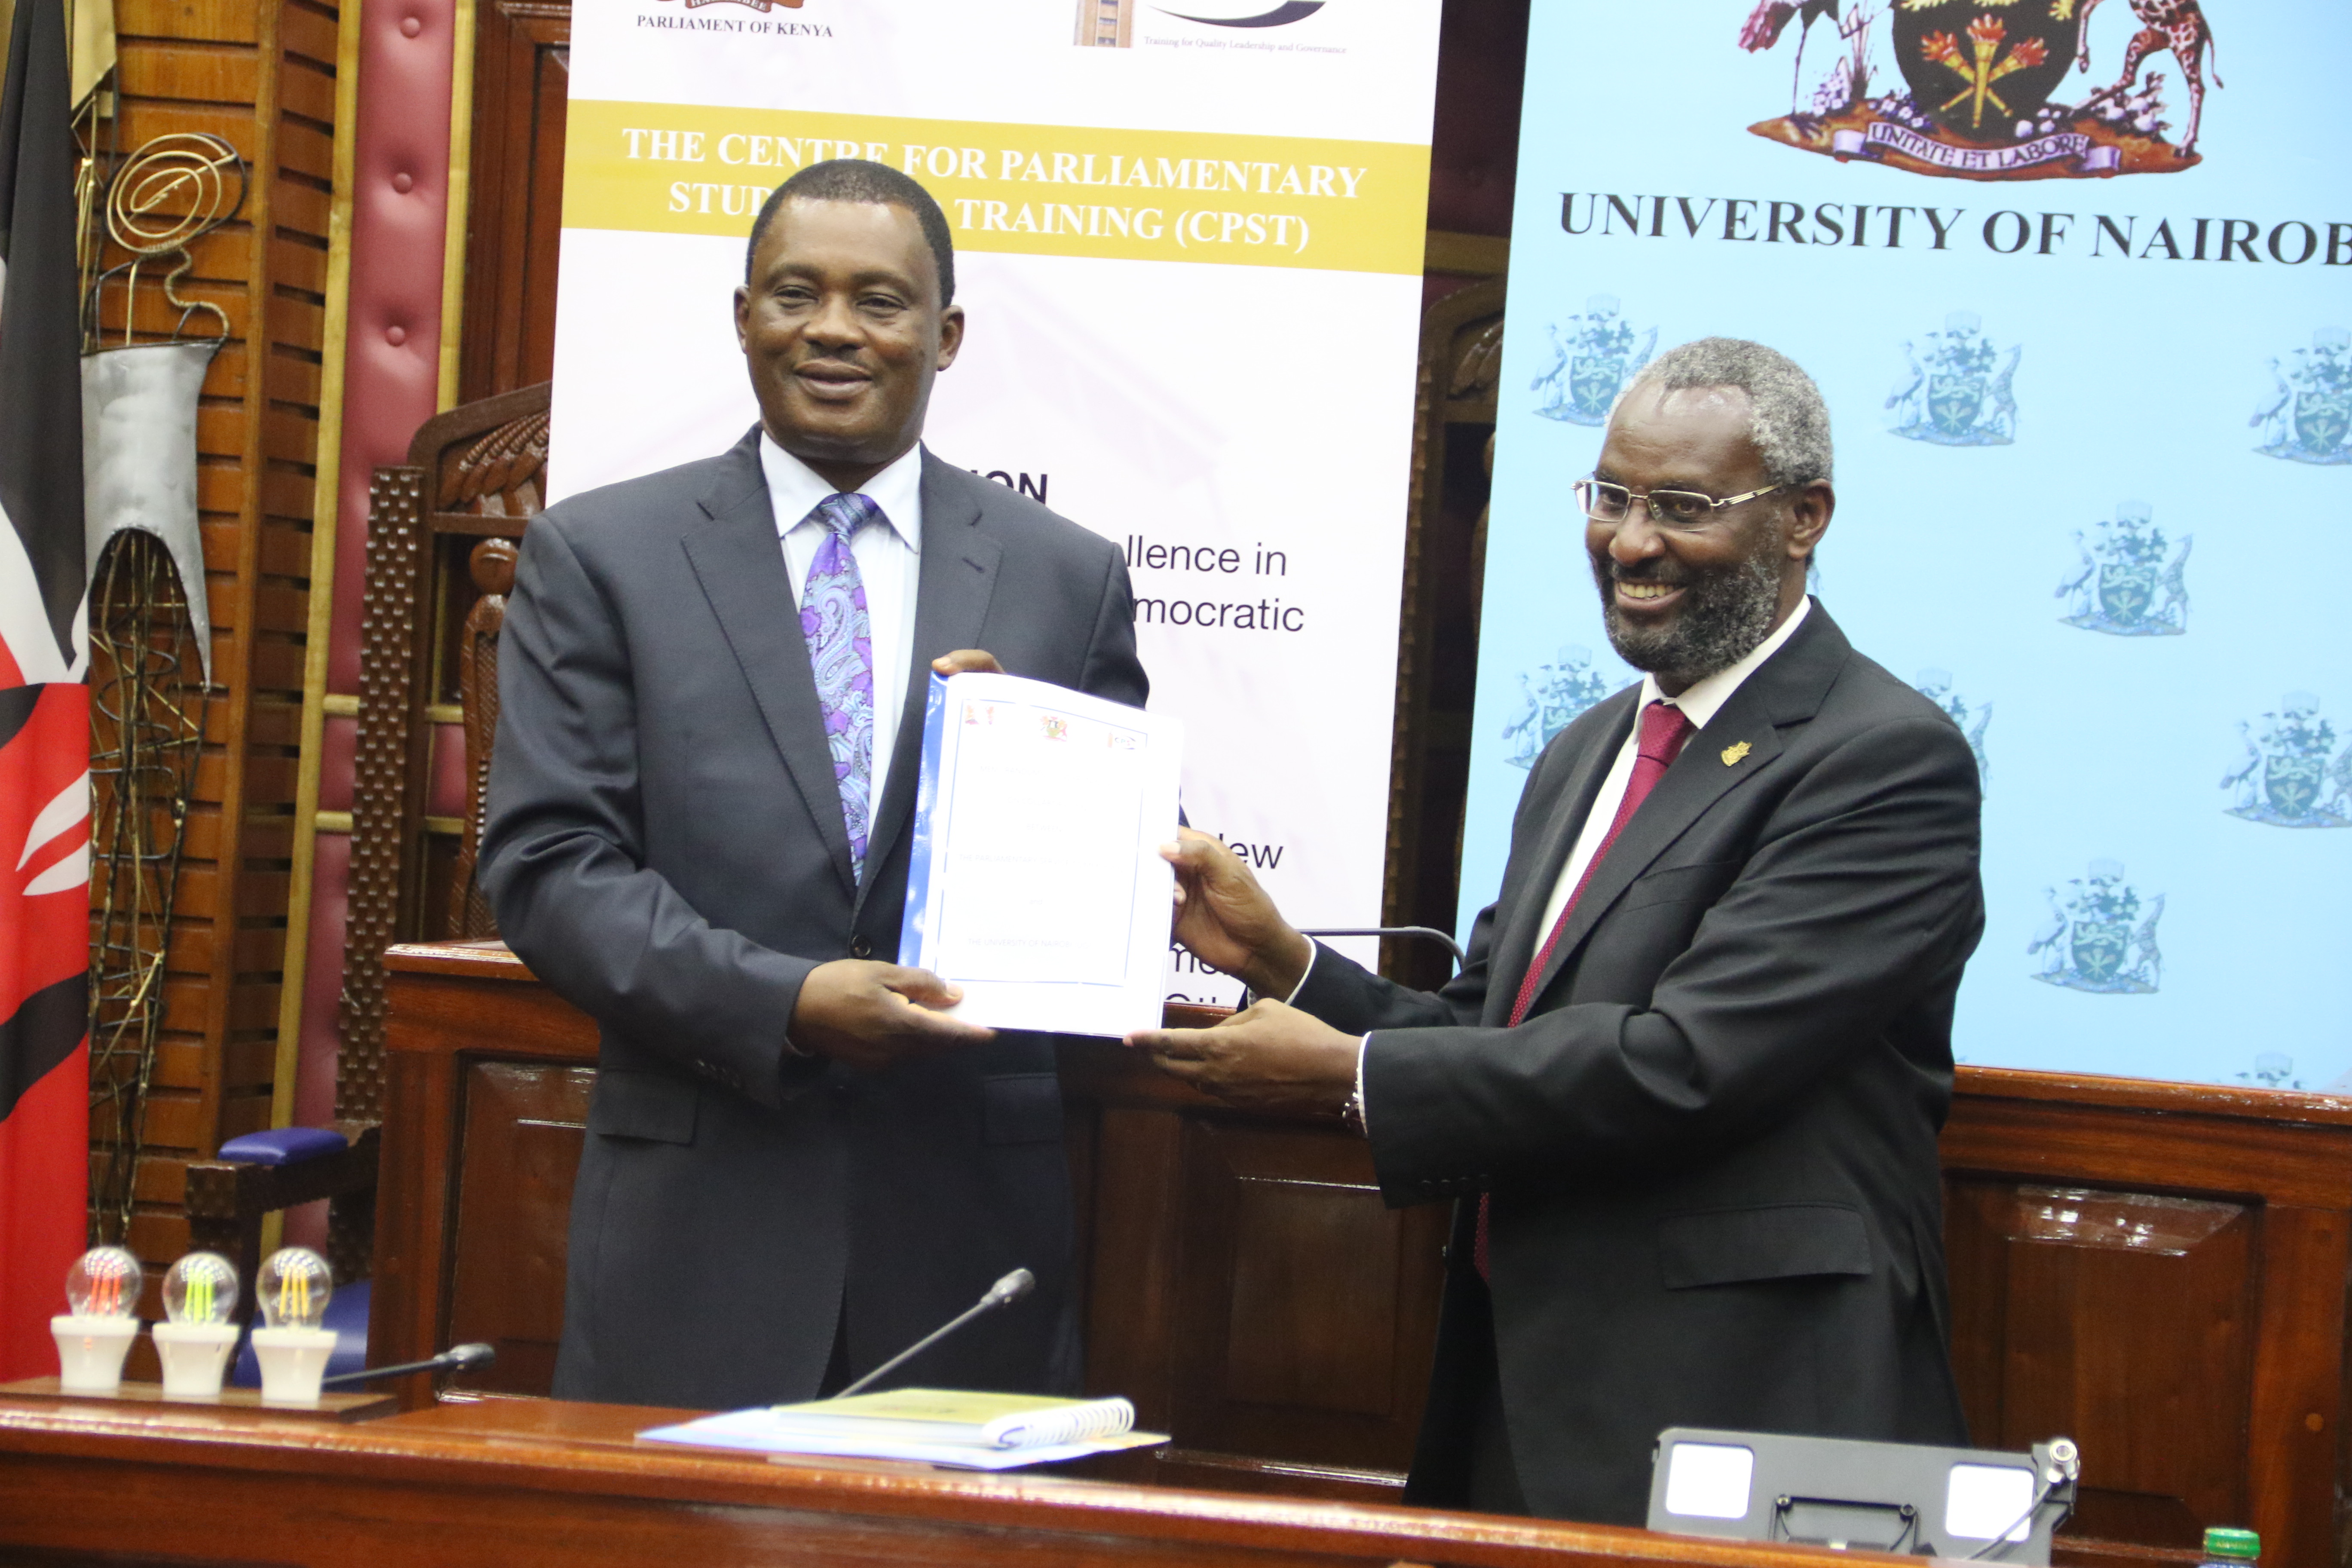 Parliament partners with the University of Nairobi to build capacity for MPs and staff